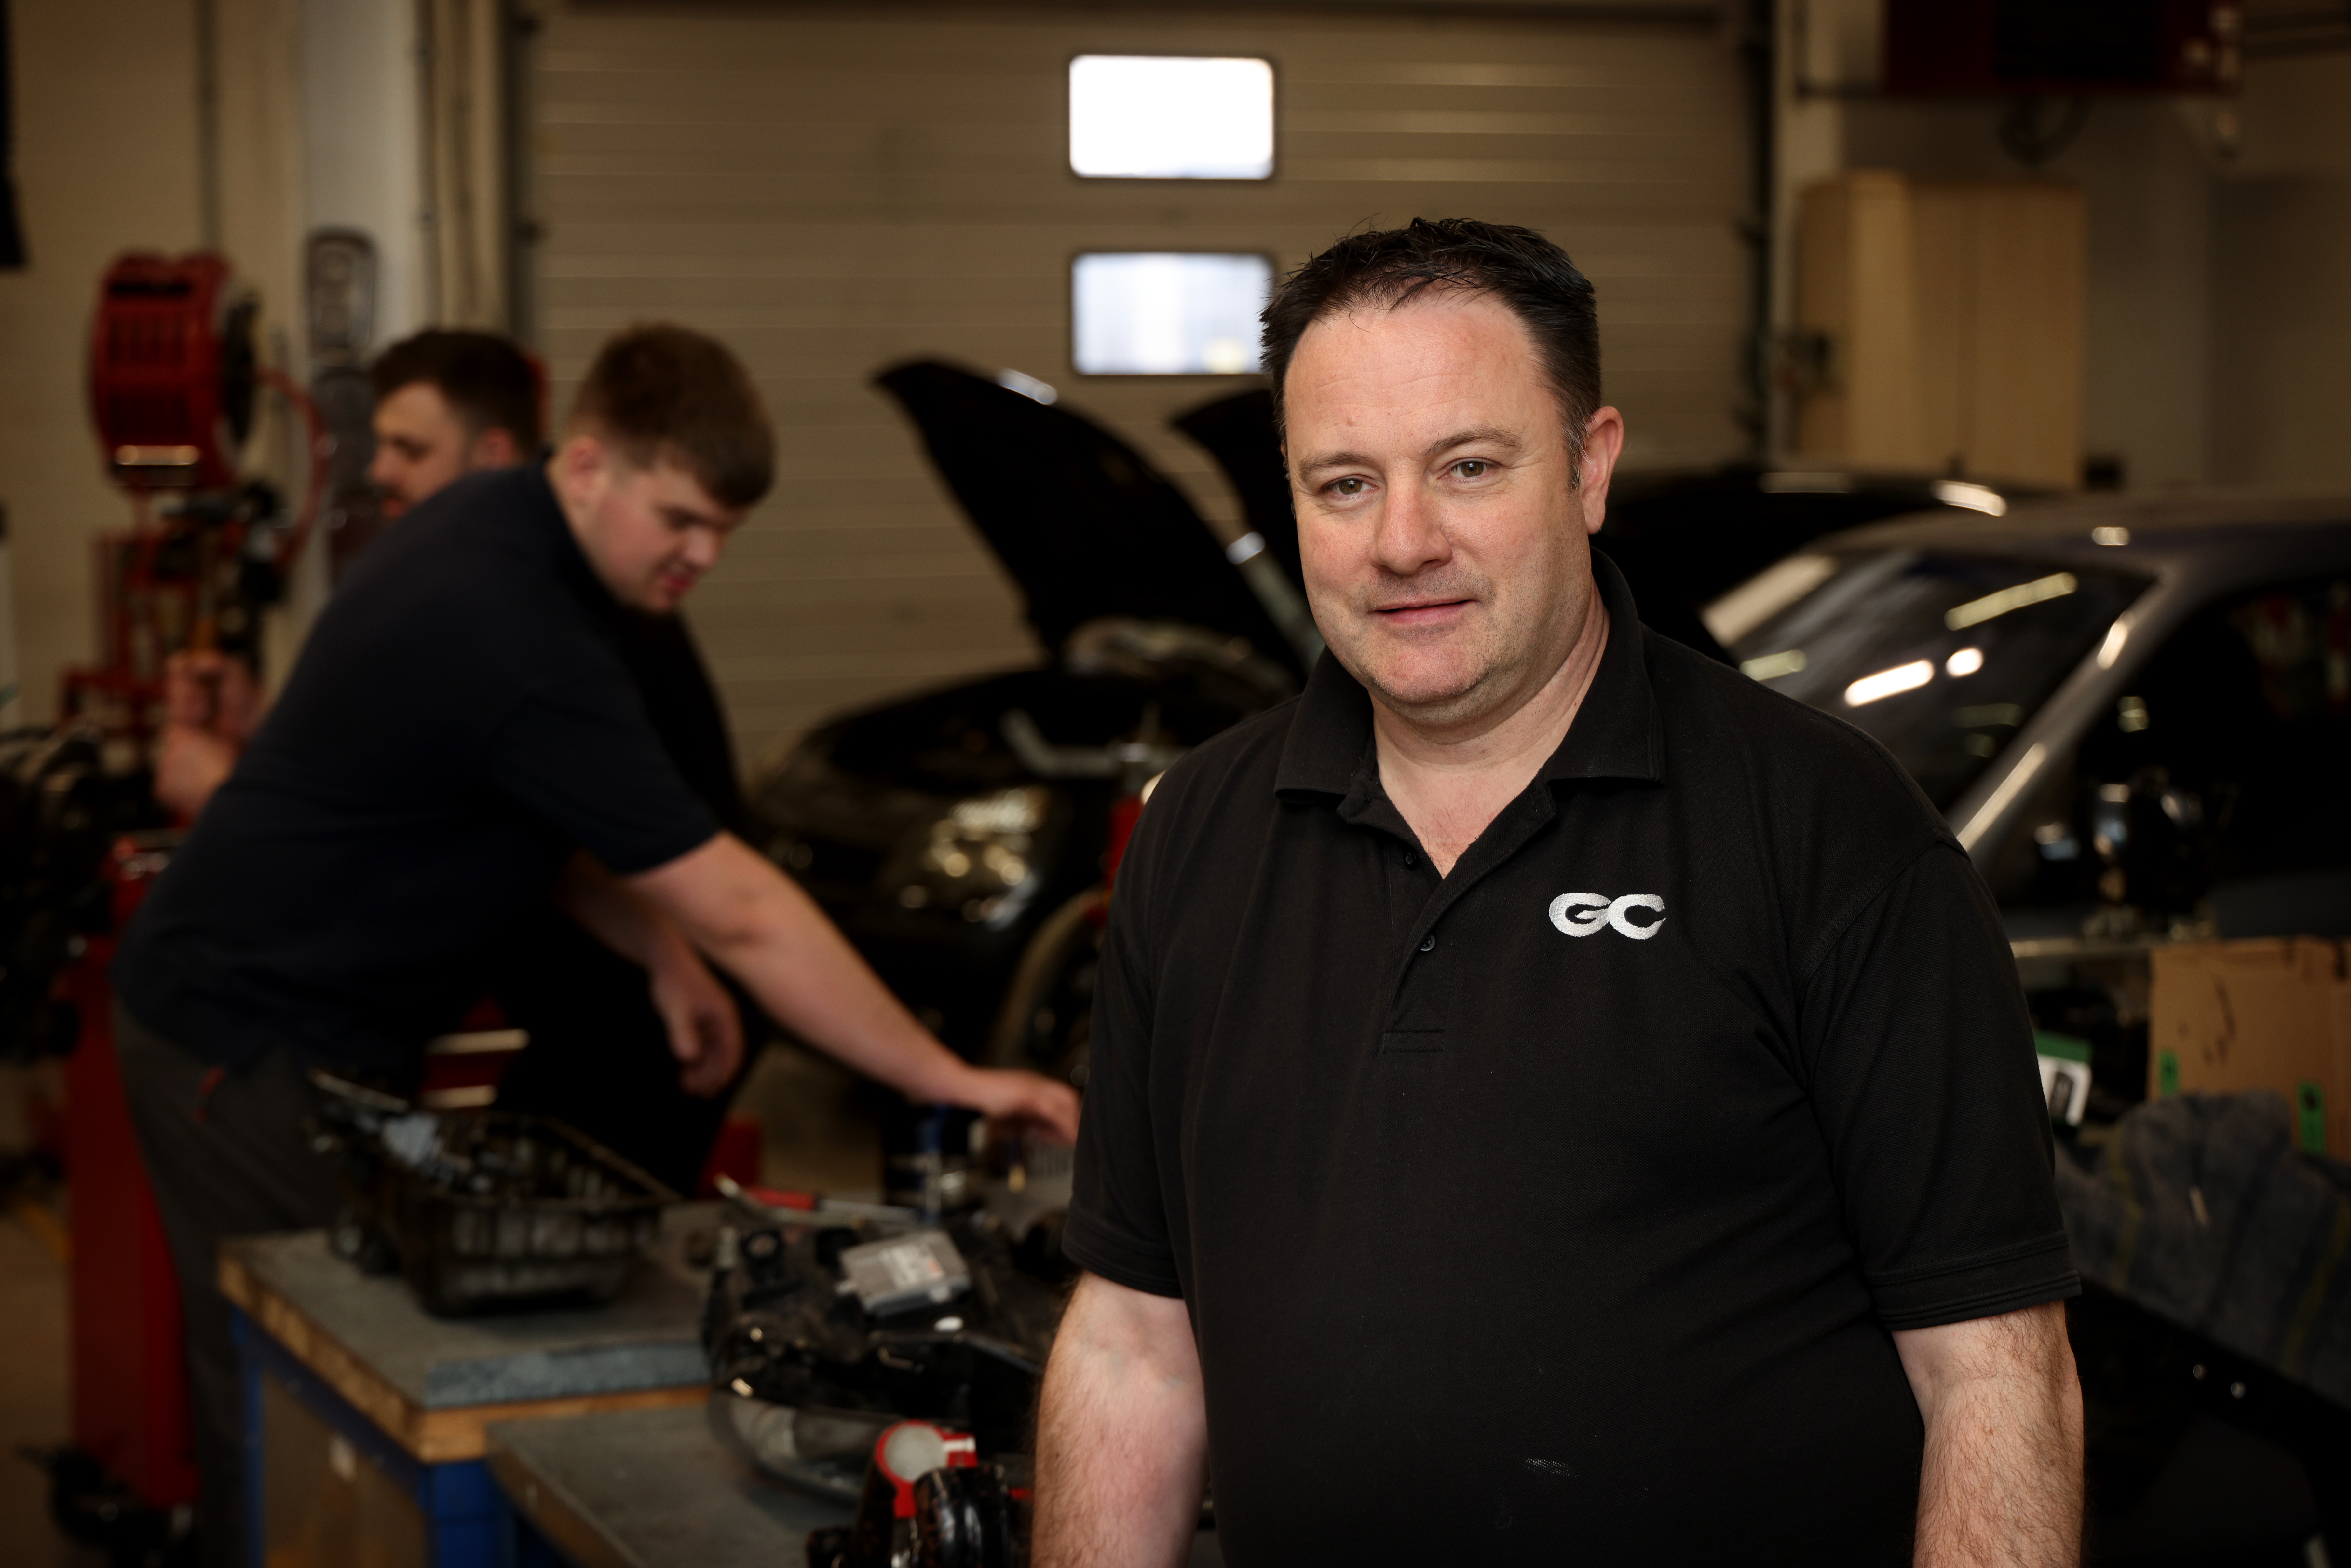 Meet Robert Papps, Lecturer in Motor Vehicle Service and Maintenance at GC